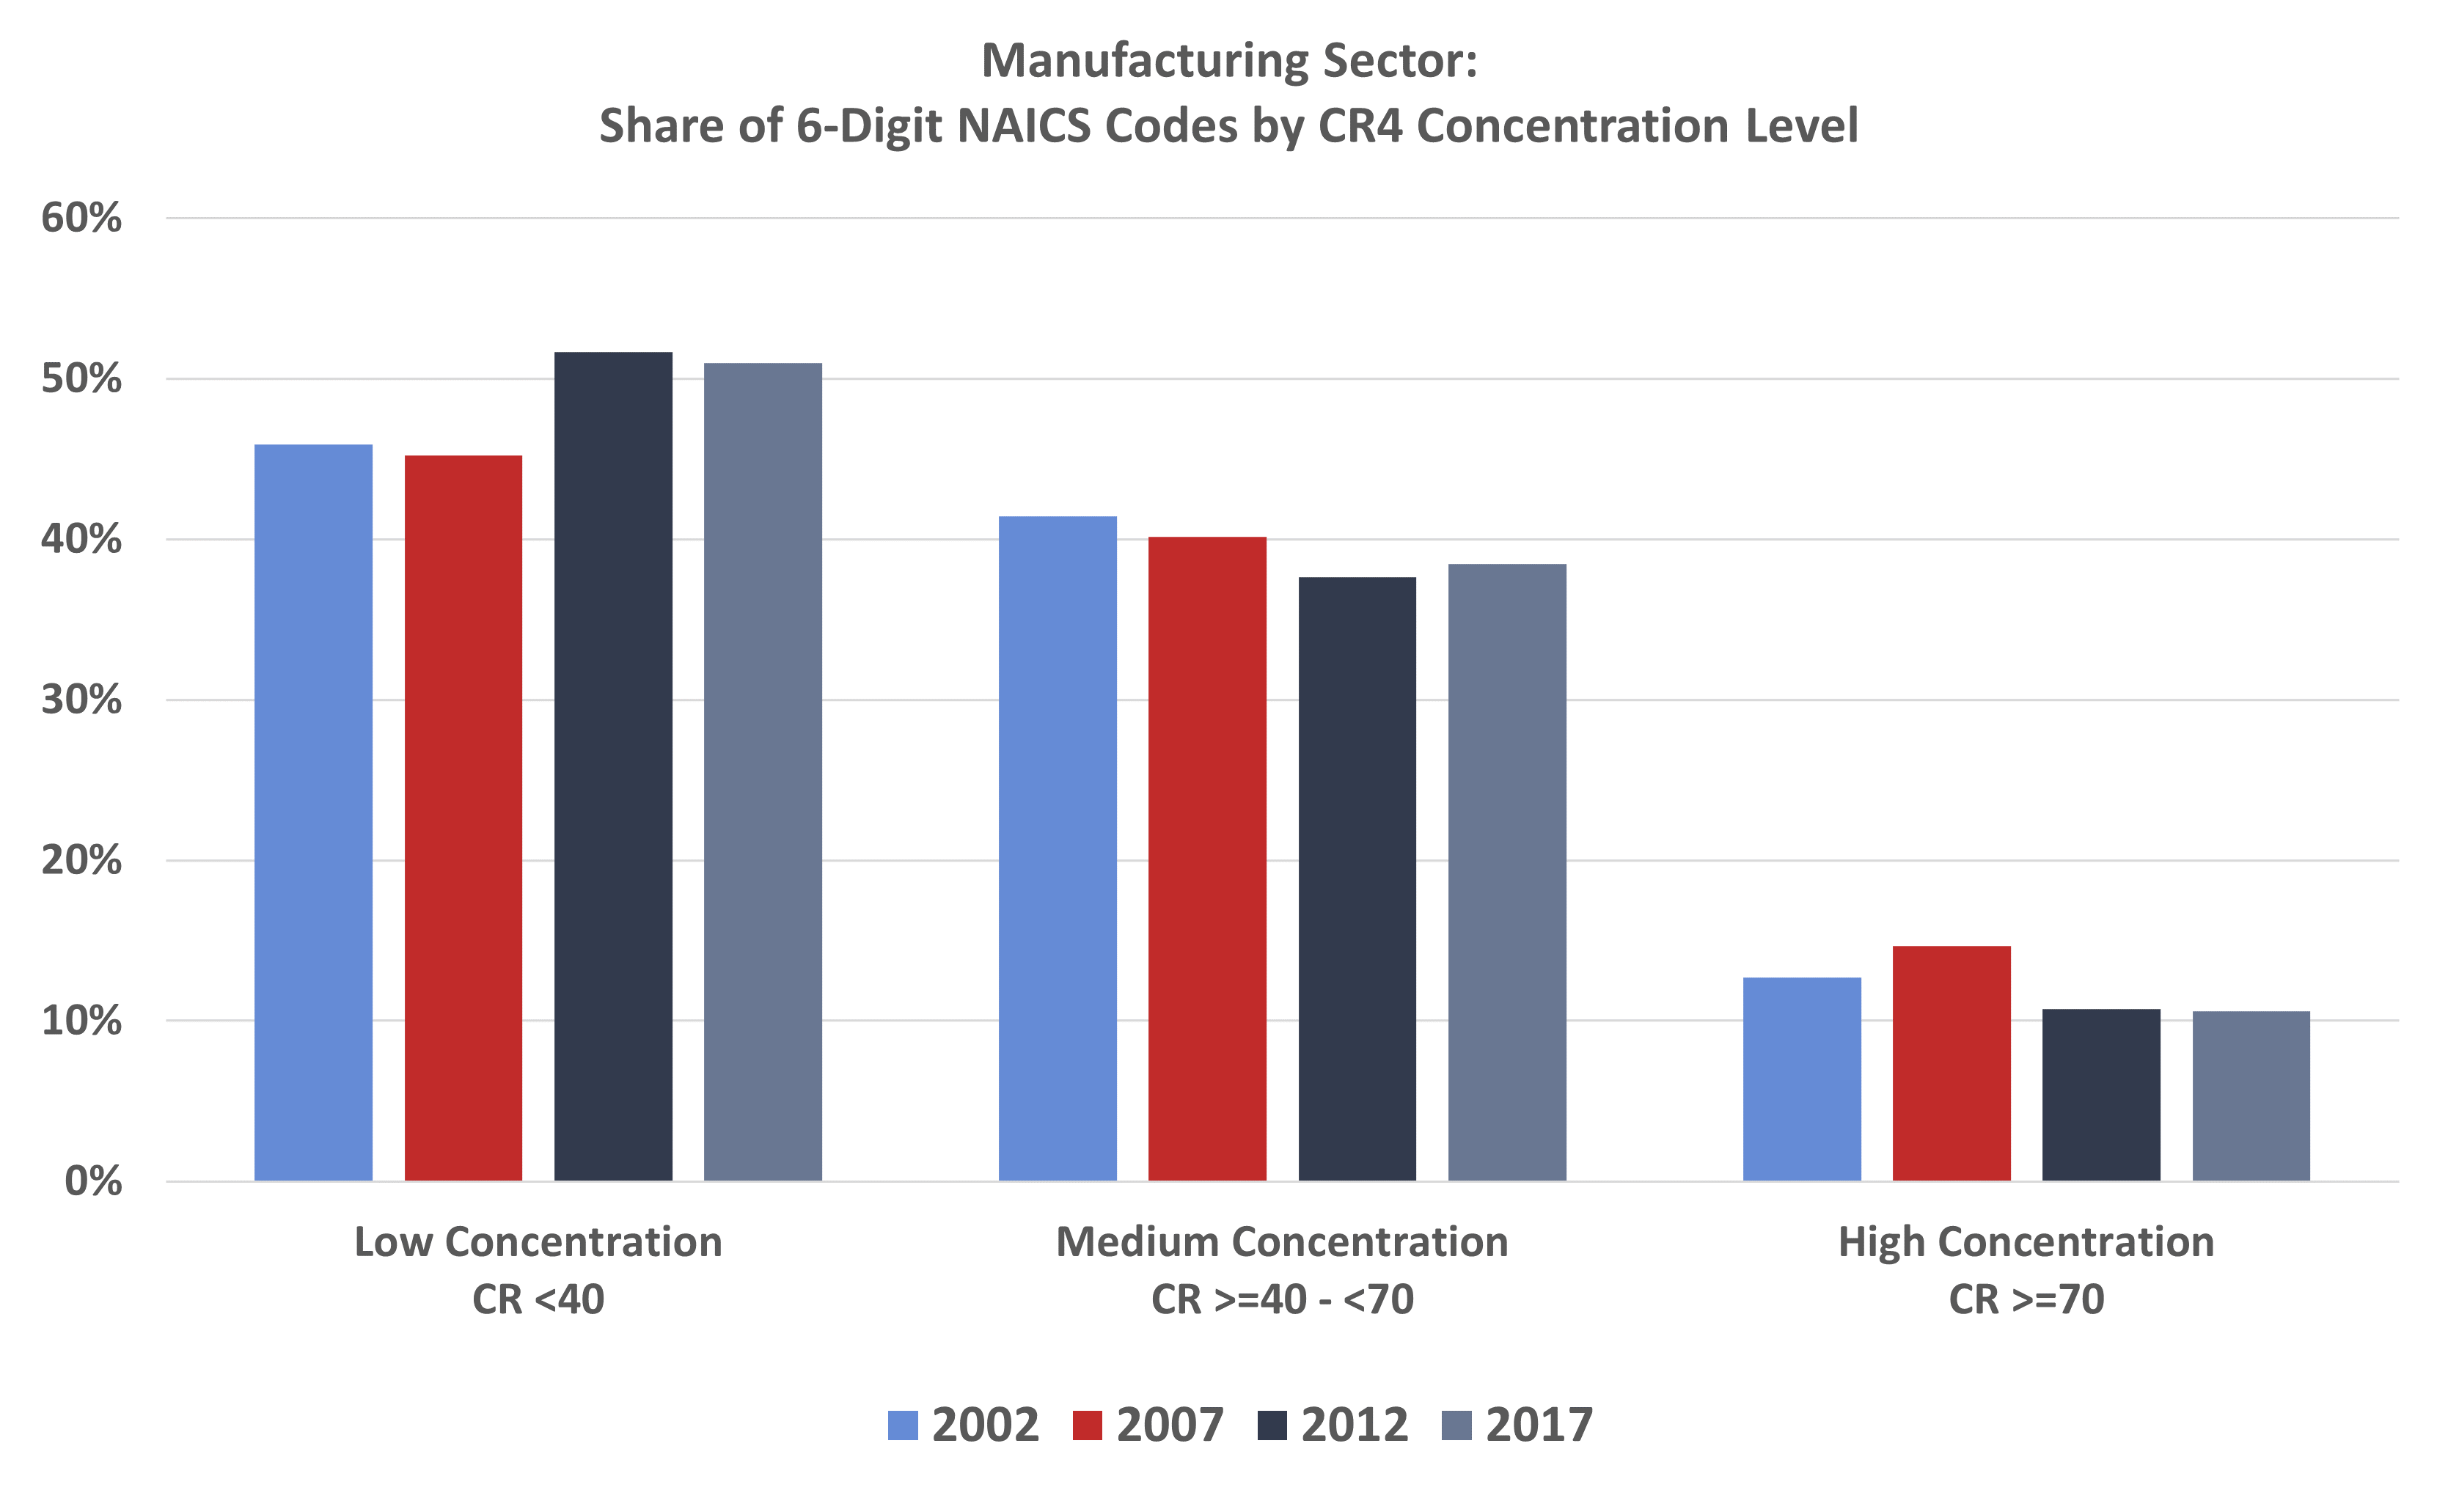 Manufacturing Sector: Share of 6-Digit NAICS Codes by CR4 Concentration Level